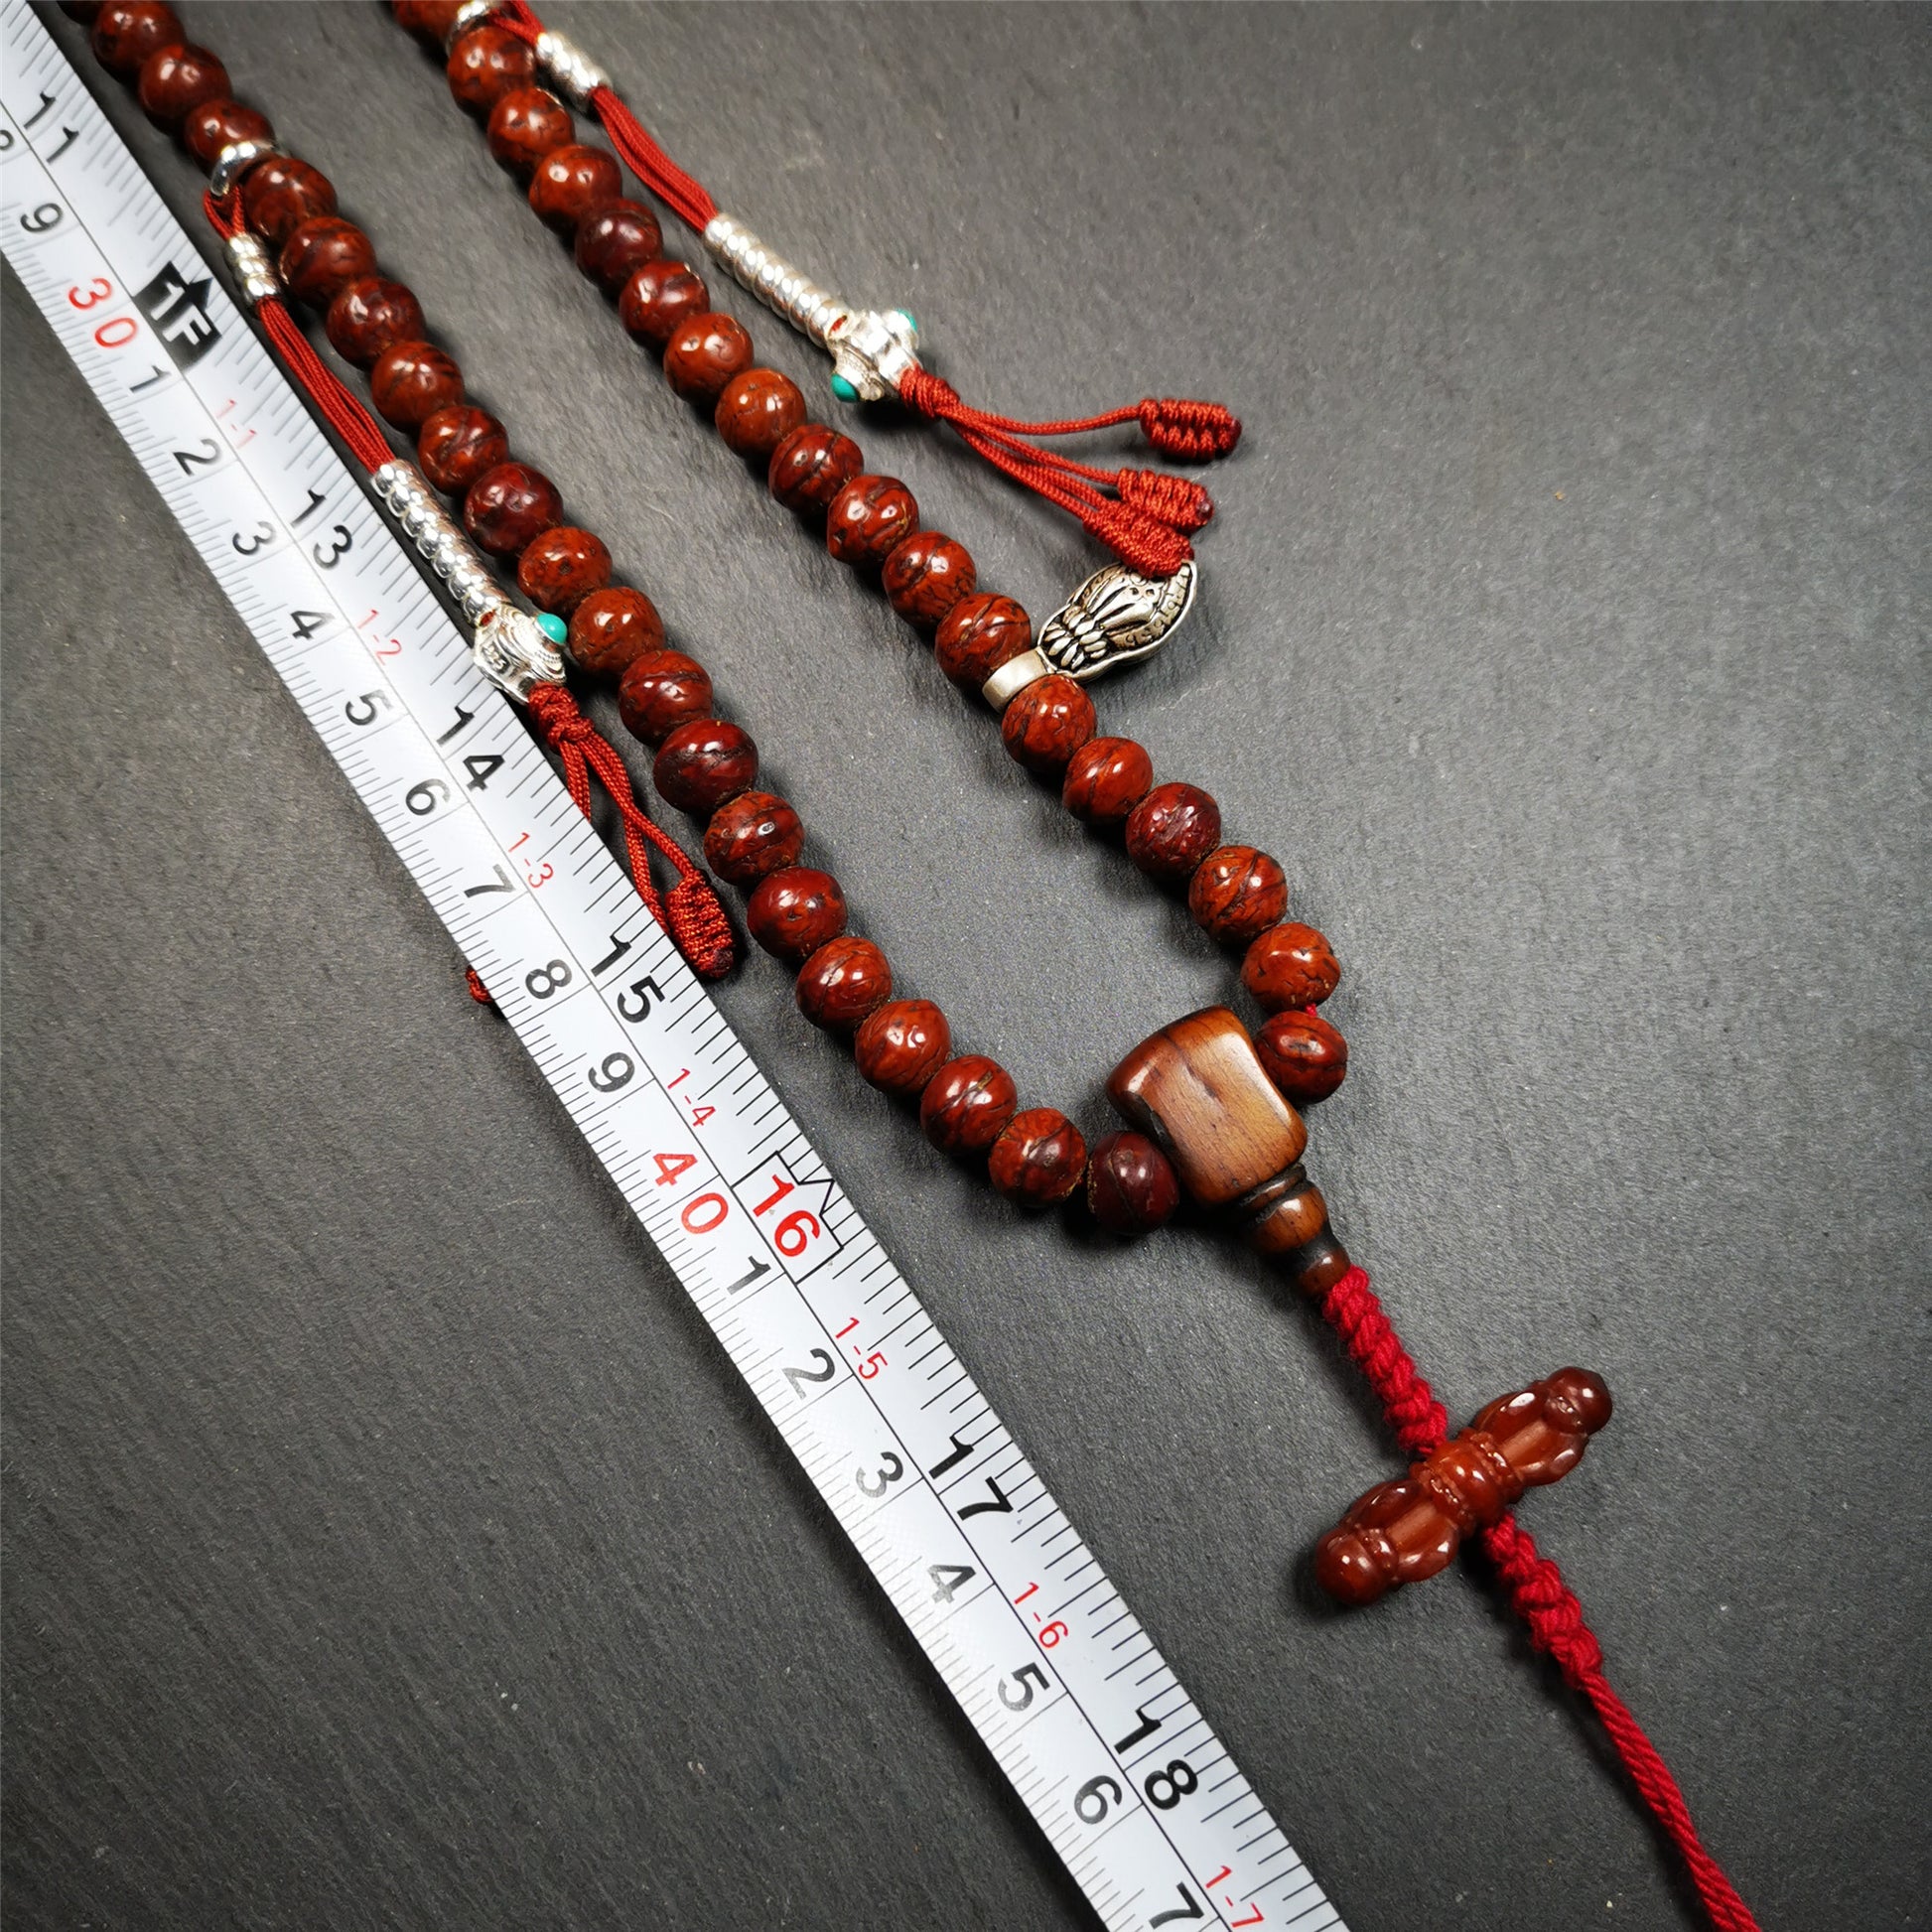 This bodhi beads mala is made by Tibetan craftsmen and come from Hepo Town, Baiyu County, the birthplace of the famous Tibetan handicrafts,about 30 years old, hold and blessed by a lama in Baiyu Monastery. It is composed of 108 bodhi seed beads, and is equipped with 3 agate beads, silver bead counters are installed on both sides, 1 mani jewel bead clip,and finally consists a bone guru bead and vajra on the end, very elegant.